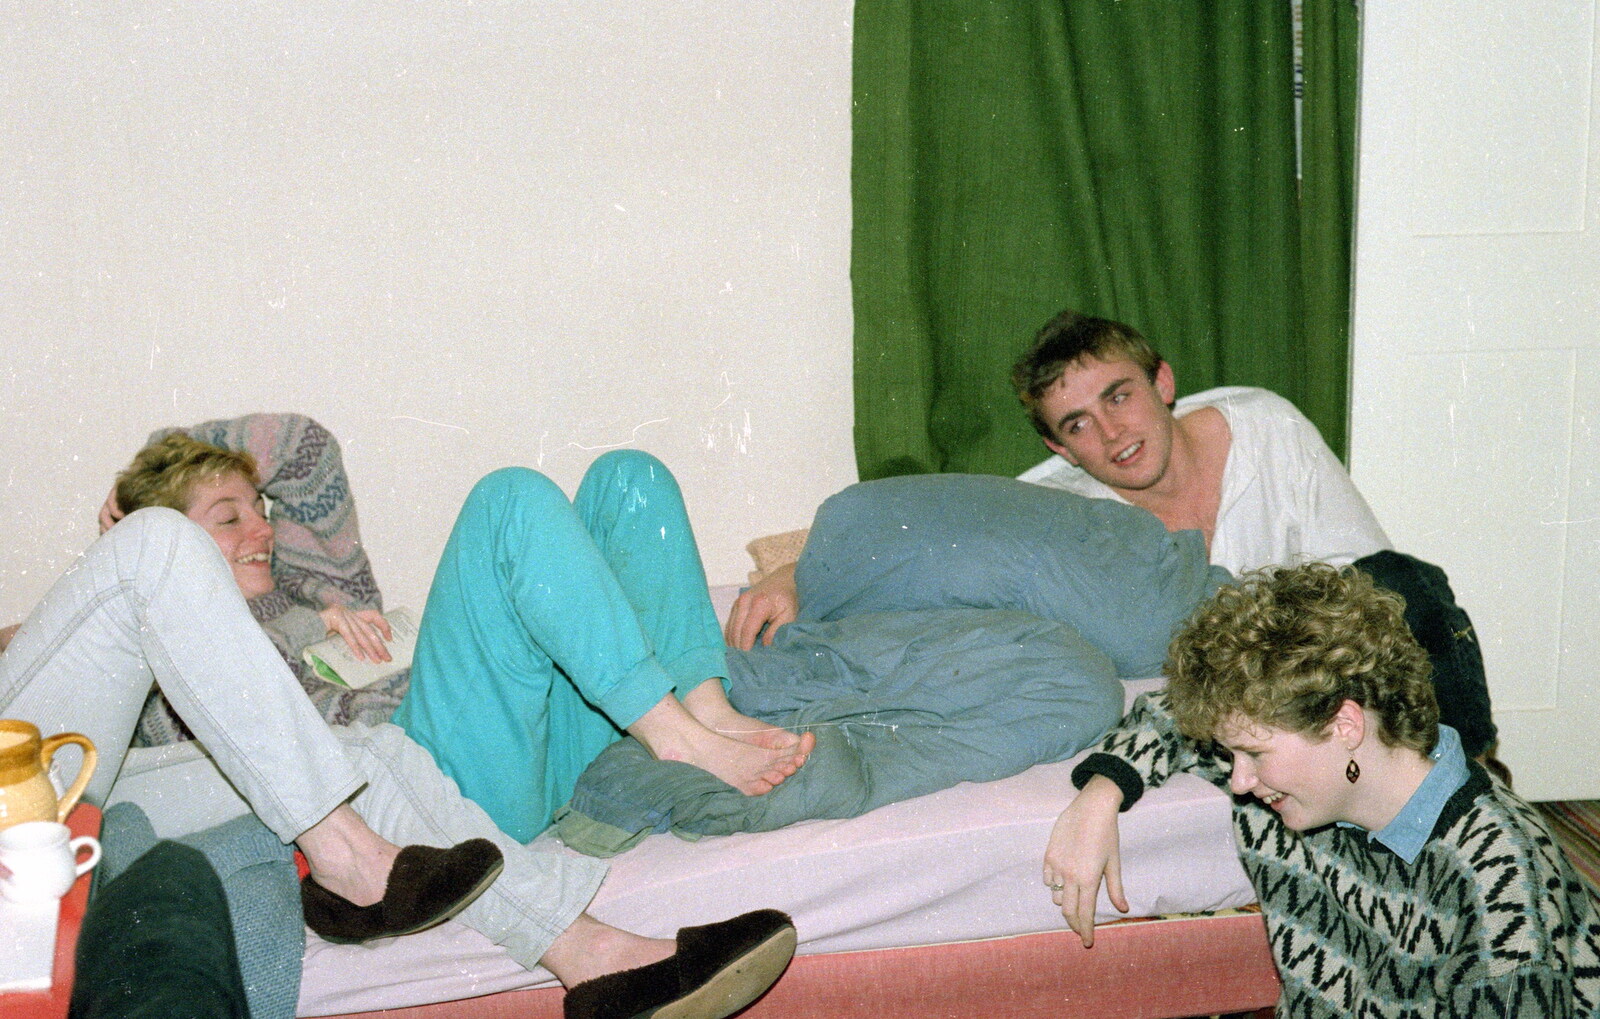 Piling on a bed from Uni: A Night In The Bank and Fly Magazine, Plymouth Polytechnic, Devon - March 10th 1986